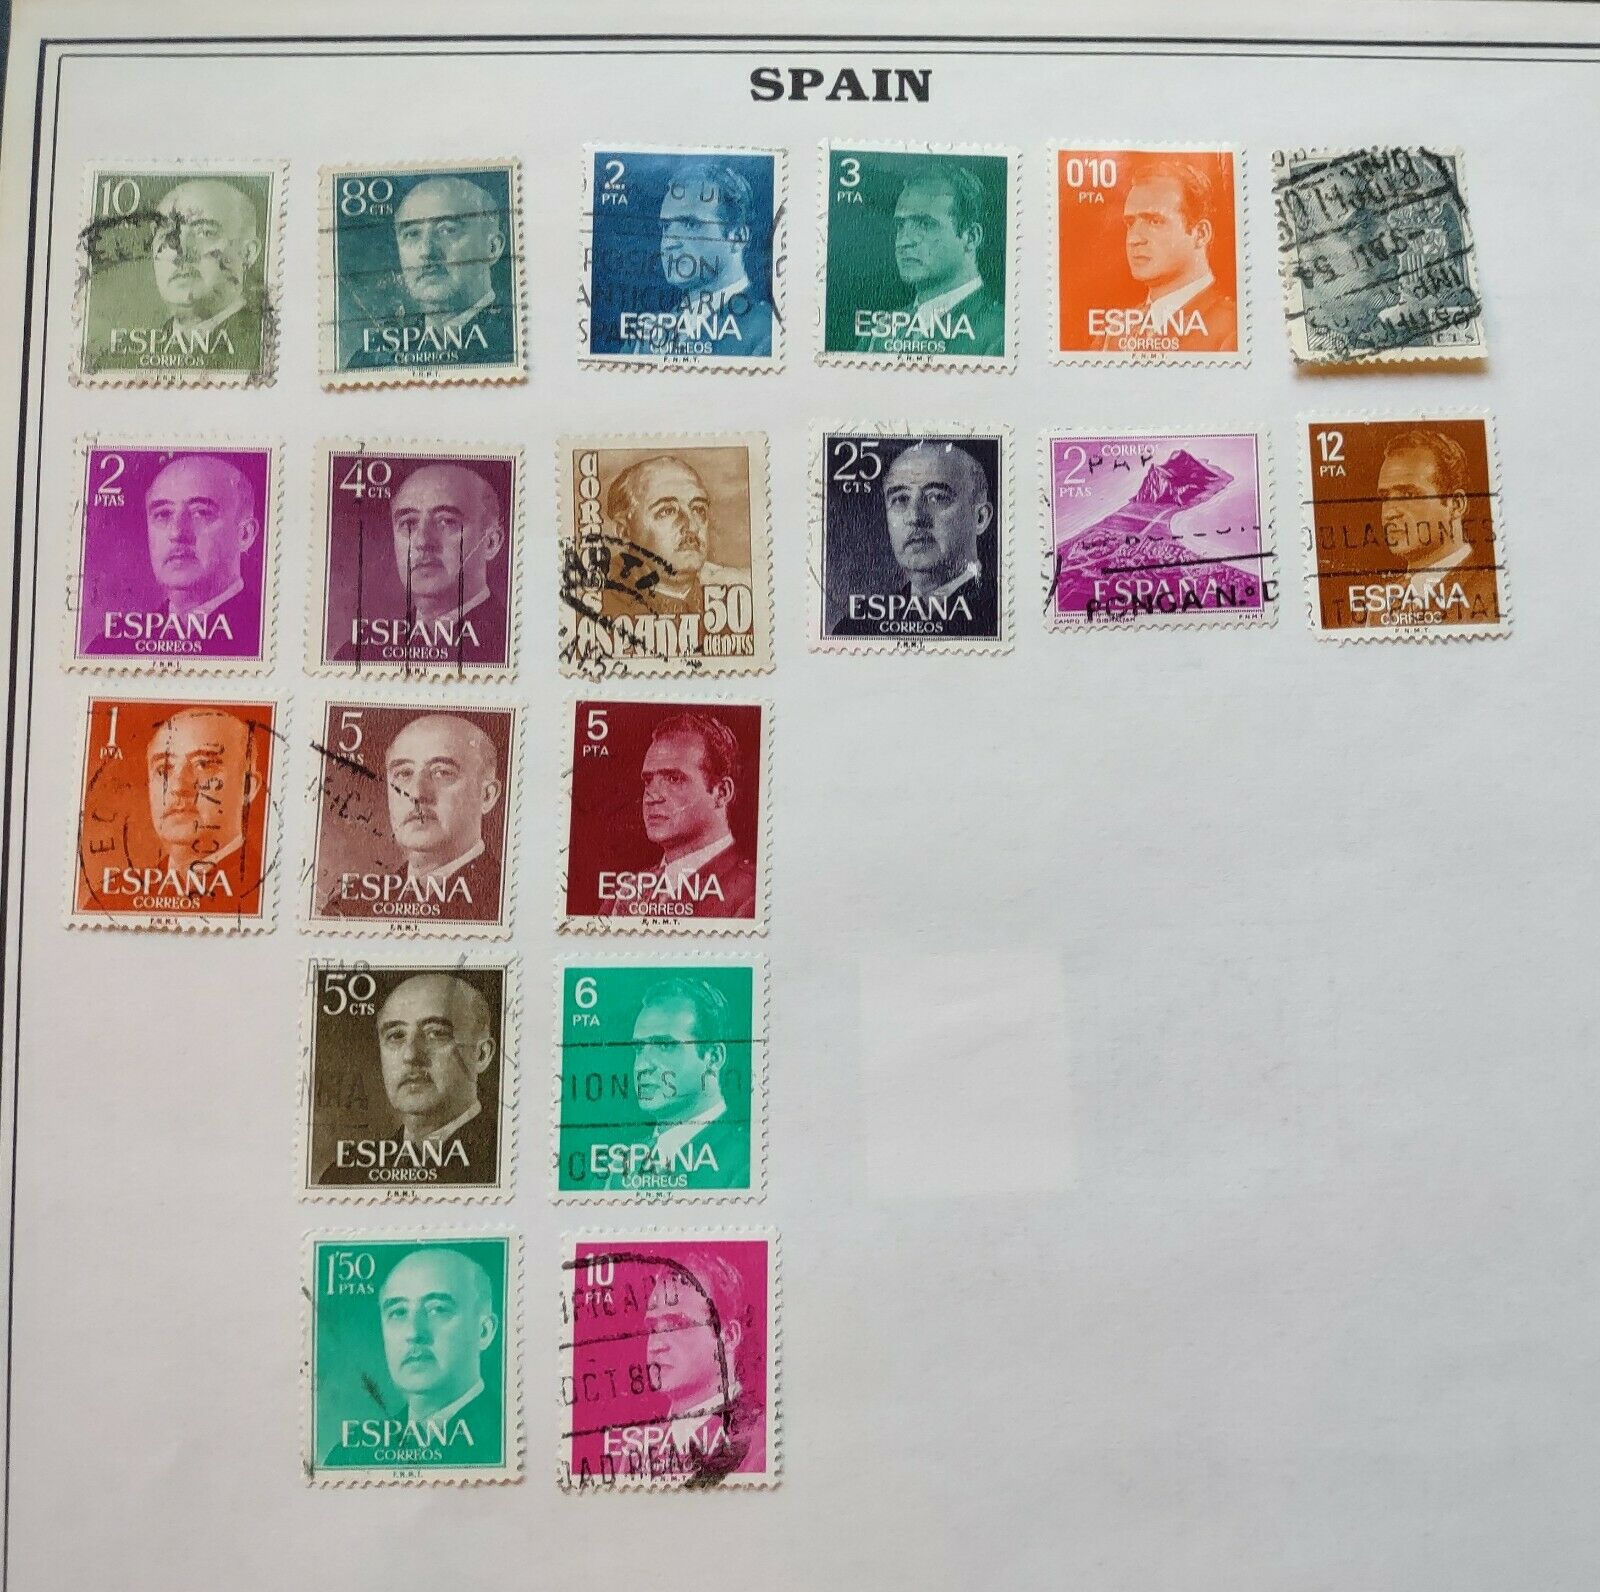 Spain Stamps • Mint / Used • King Juan Carlos I + • All Shown • 99¢ Low Start